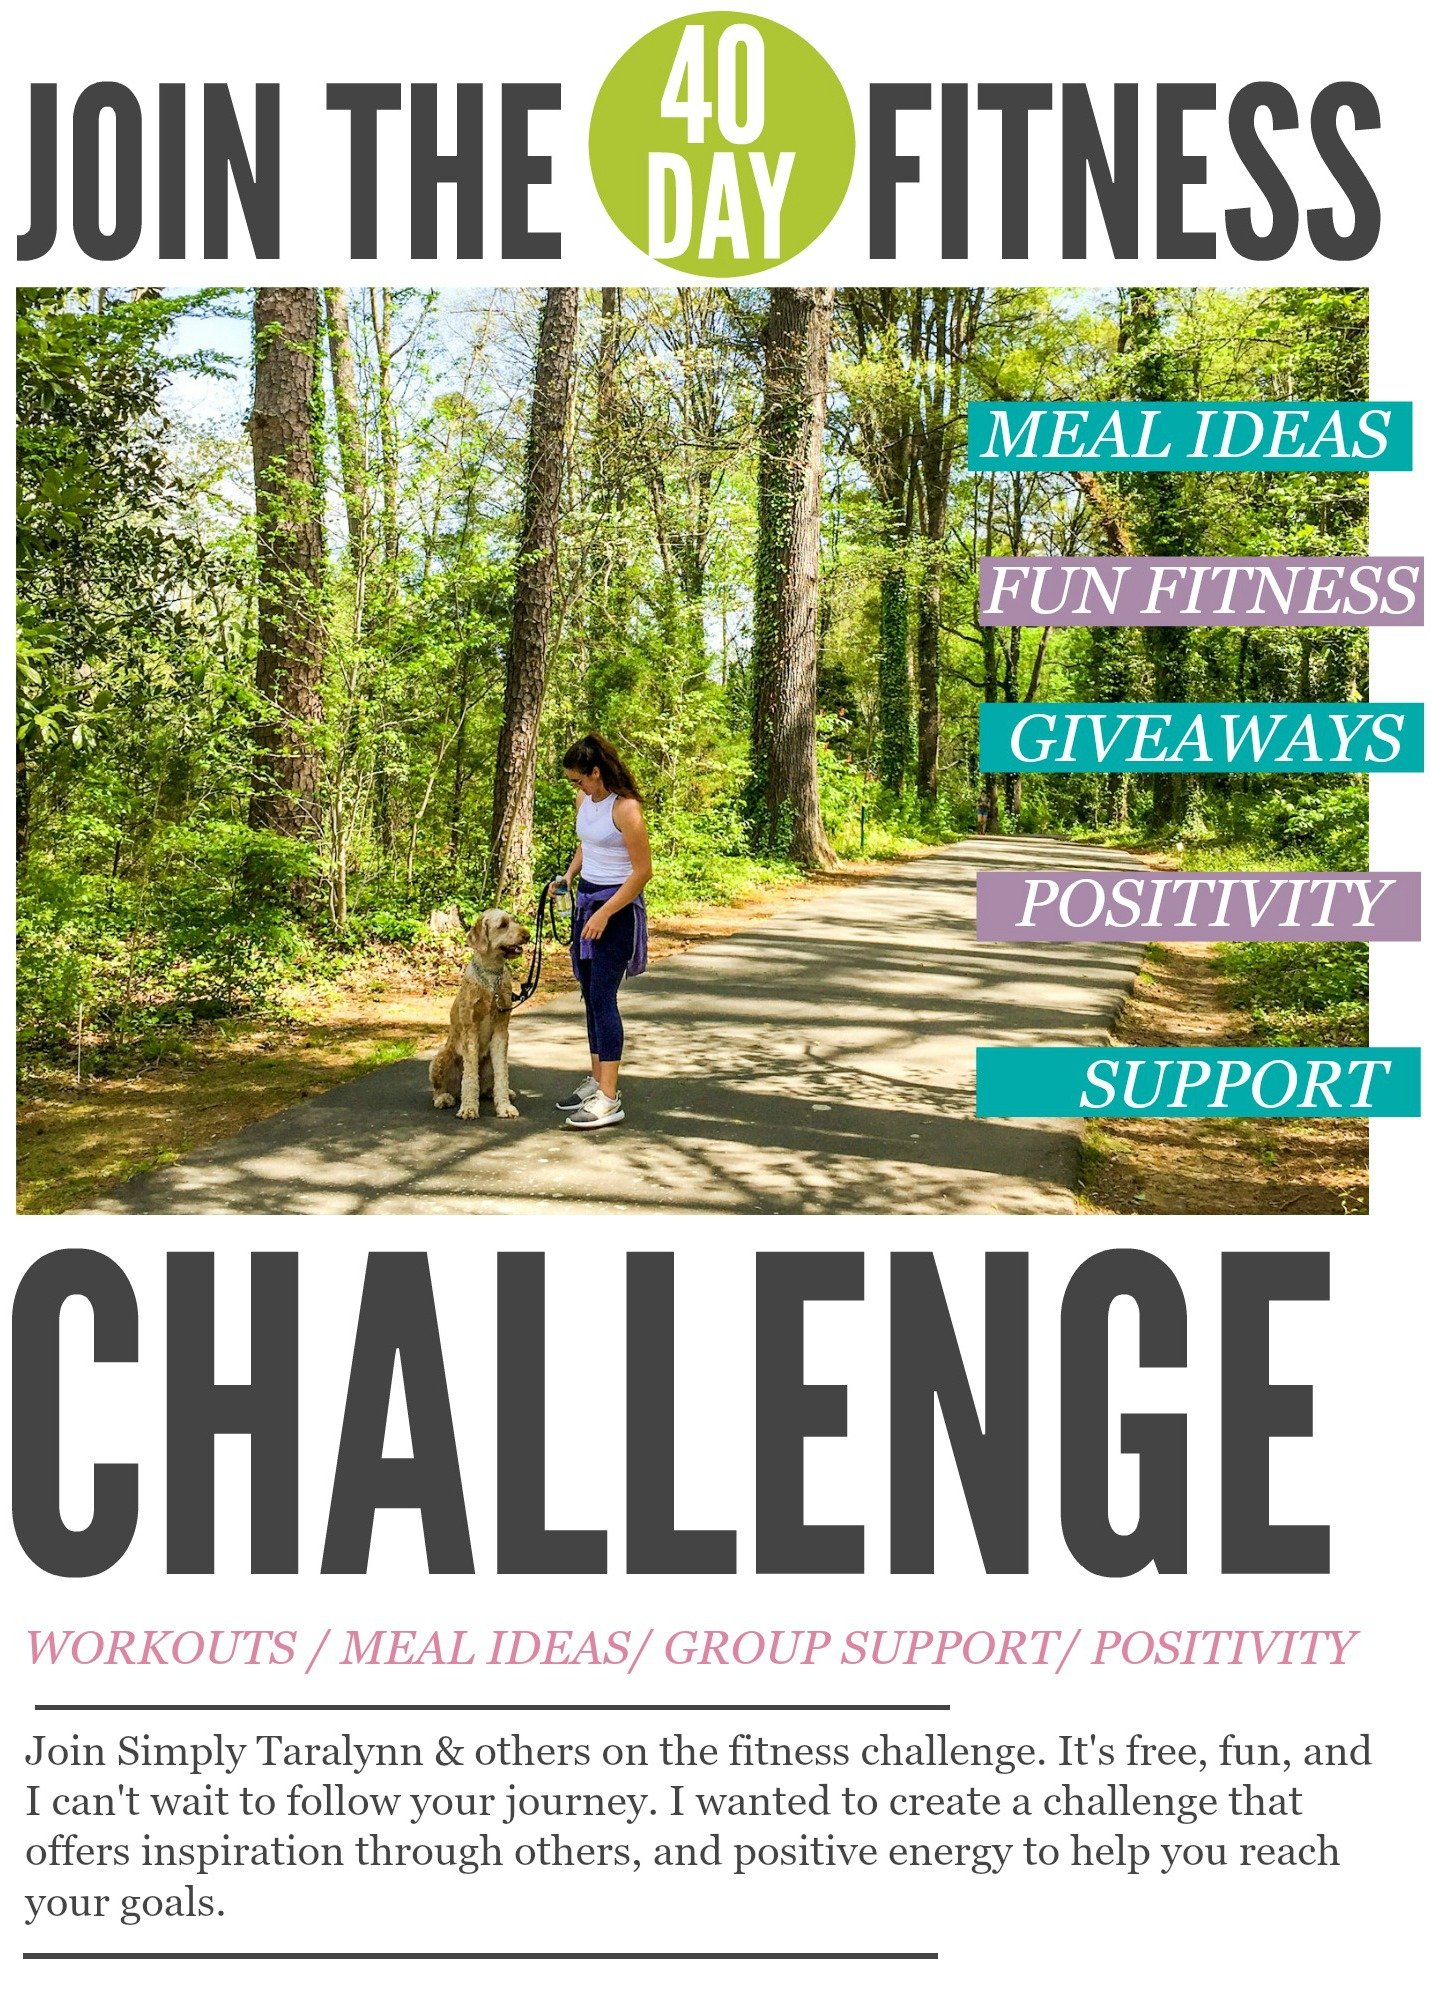 The 40 Fitness Challenge: Fitness, & Prizes! - Simply Taralynn | Food & Blog